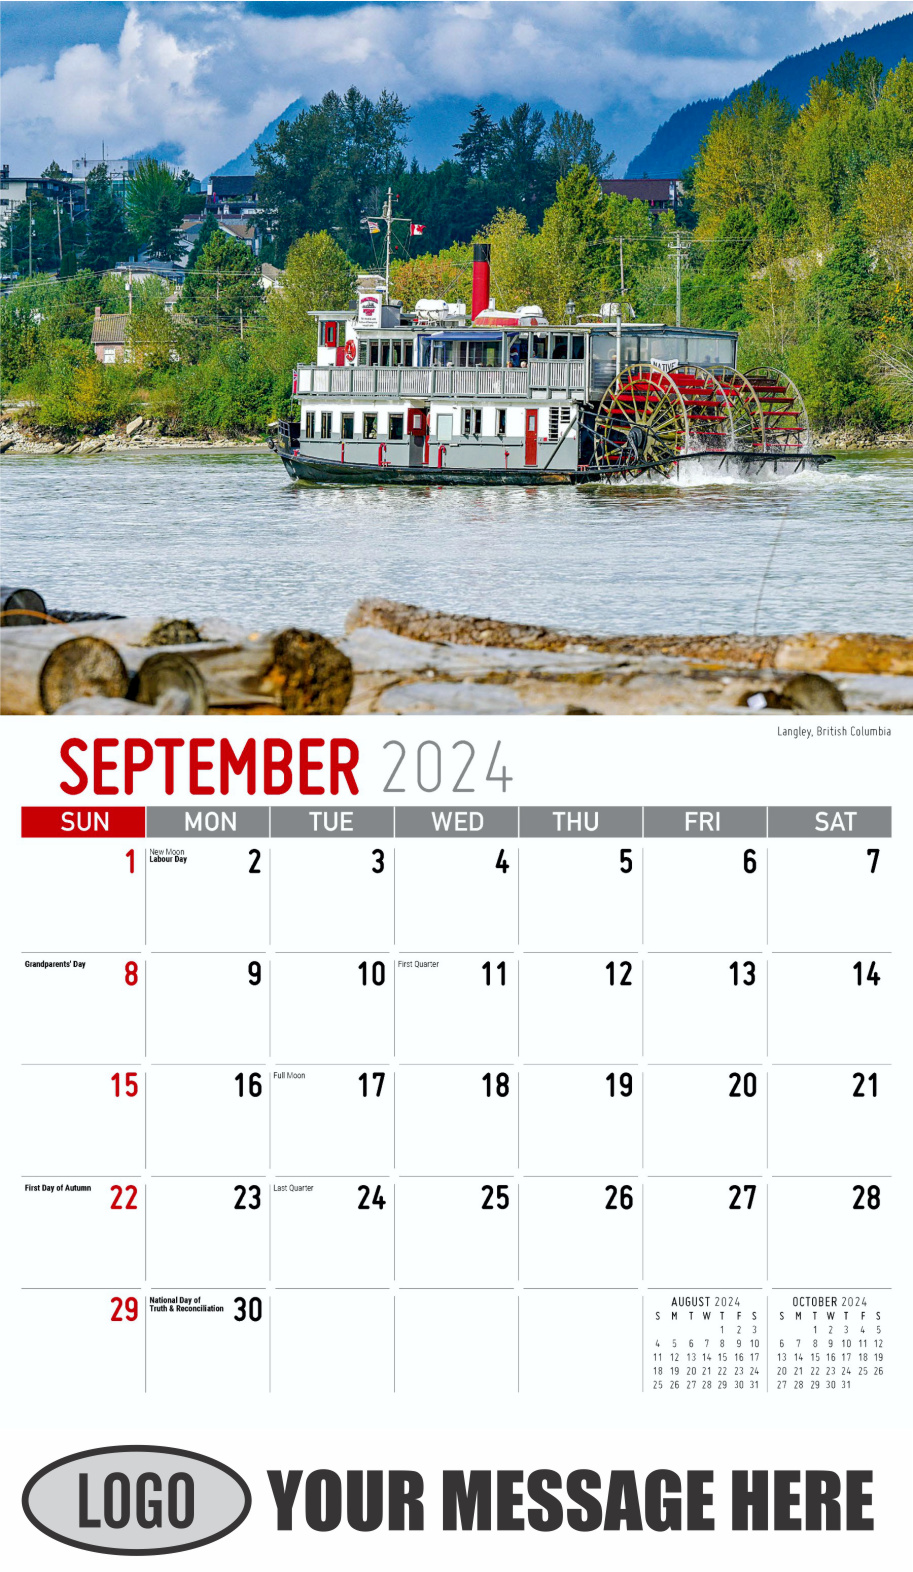 Scenes of Western Canada 2024 Business Promotional Wall Calendar - September